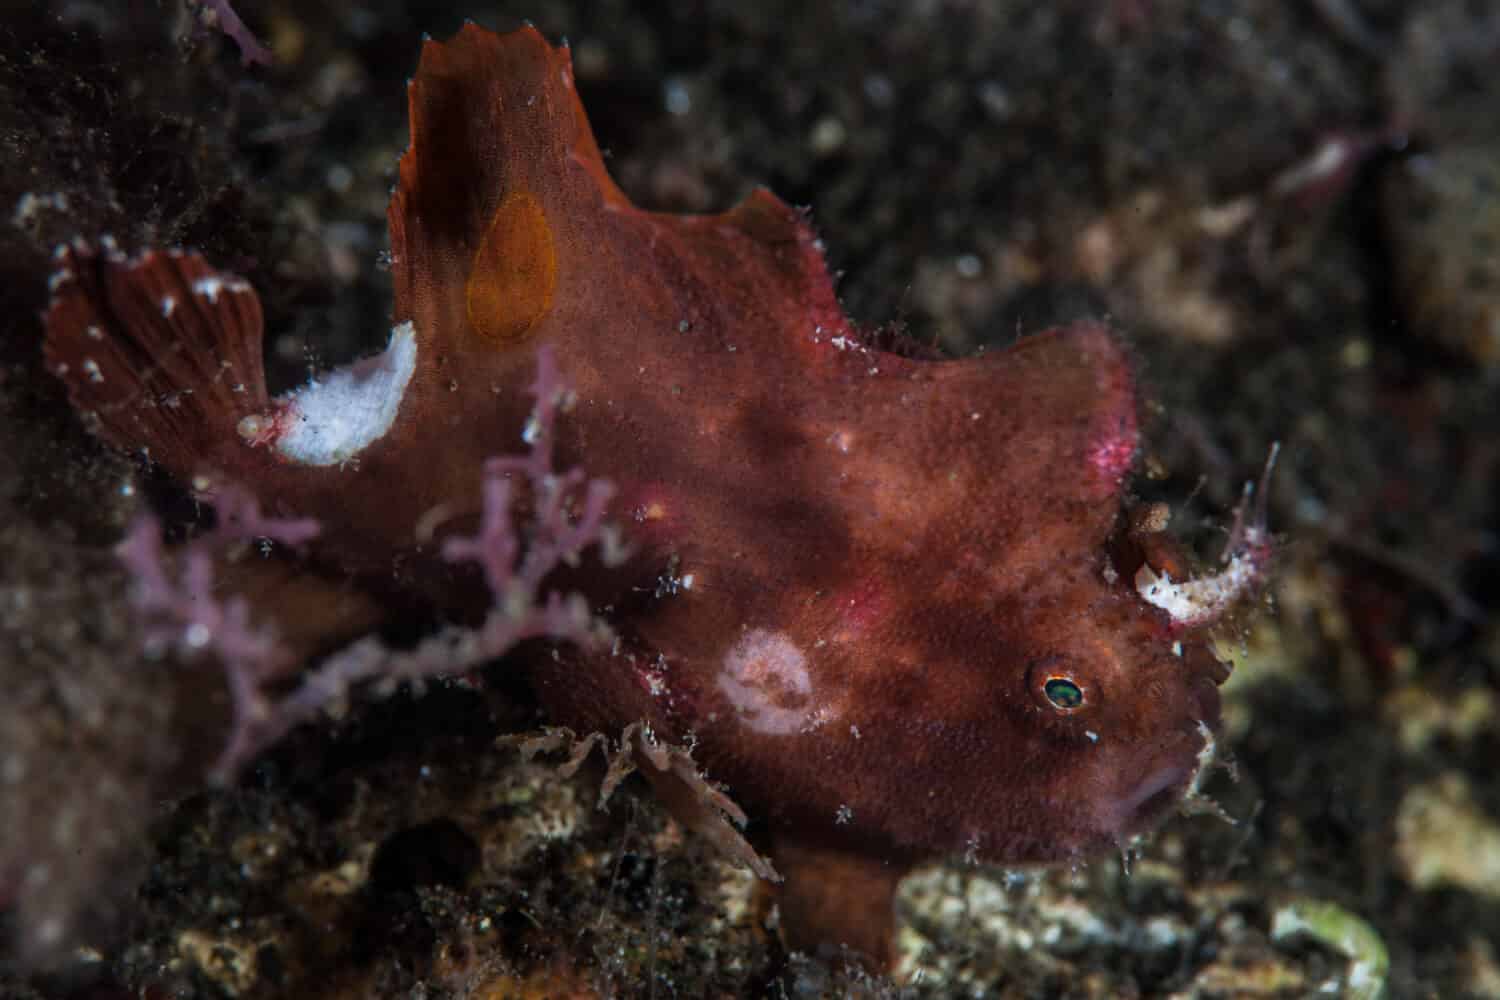 A young Island frogfish, Antennarius be., hunts for prey in the Caribbean. Frogfish use camouflage to mimic common marine life such as sponges. 